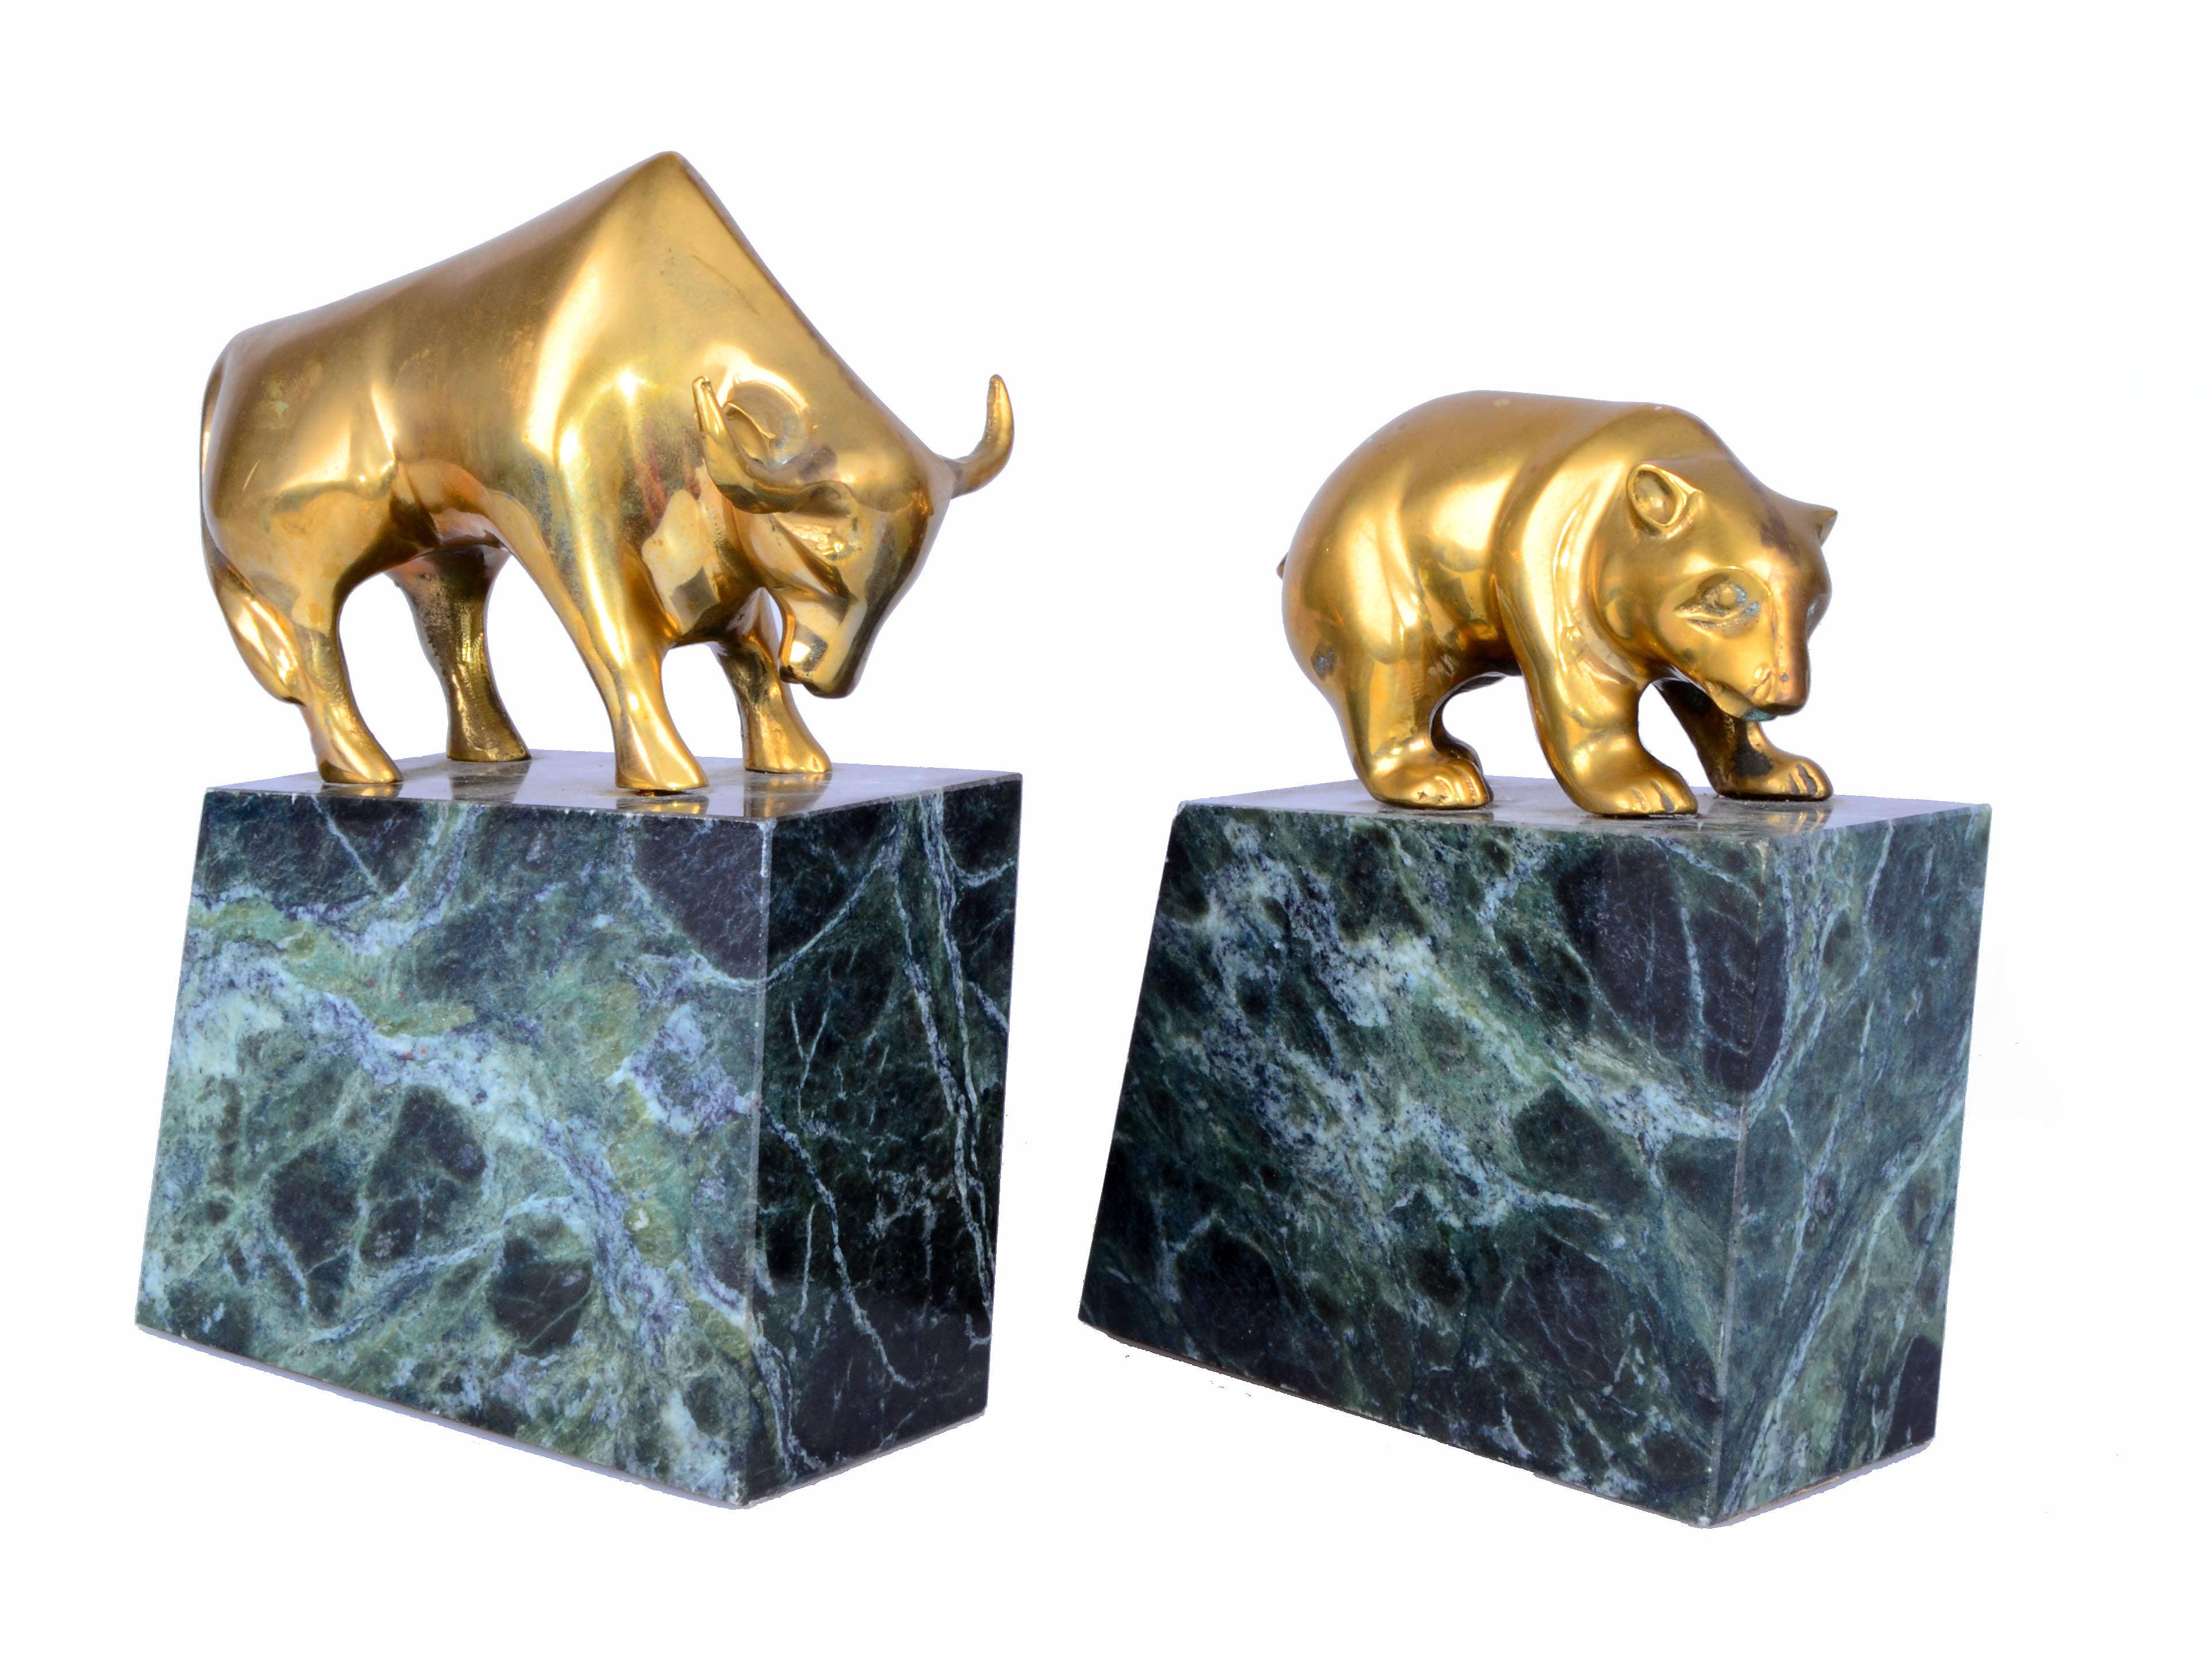 Heavy brass bull and bear bookends on green marble bases. No markings.
Note: The aged brass shows a nice patina.
Dimensions bear: Length 5 inches, width 2.5 inches, height 7 inches.